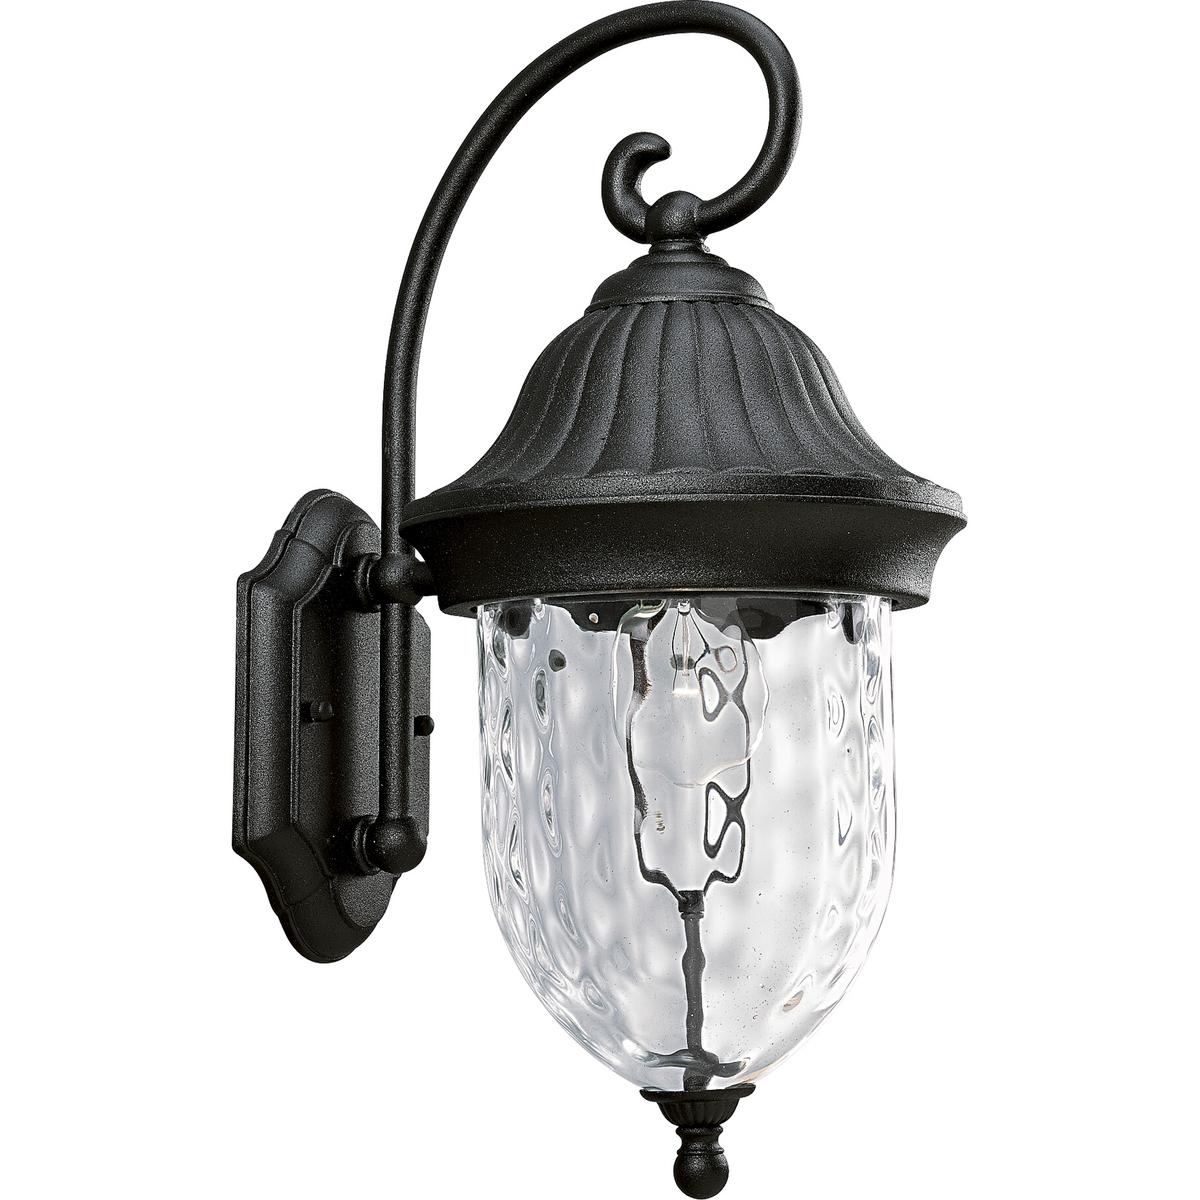 Hubbell P5828-31 Capture the romance with this one-light wall lantern from the Coventry collection that features optic hammered glass, stylized cap and Sheppard's hook. Die-cast aluminum construction. Textured Black finish.  ; Textured Black finish. ; Optic hammered glass